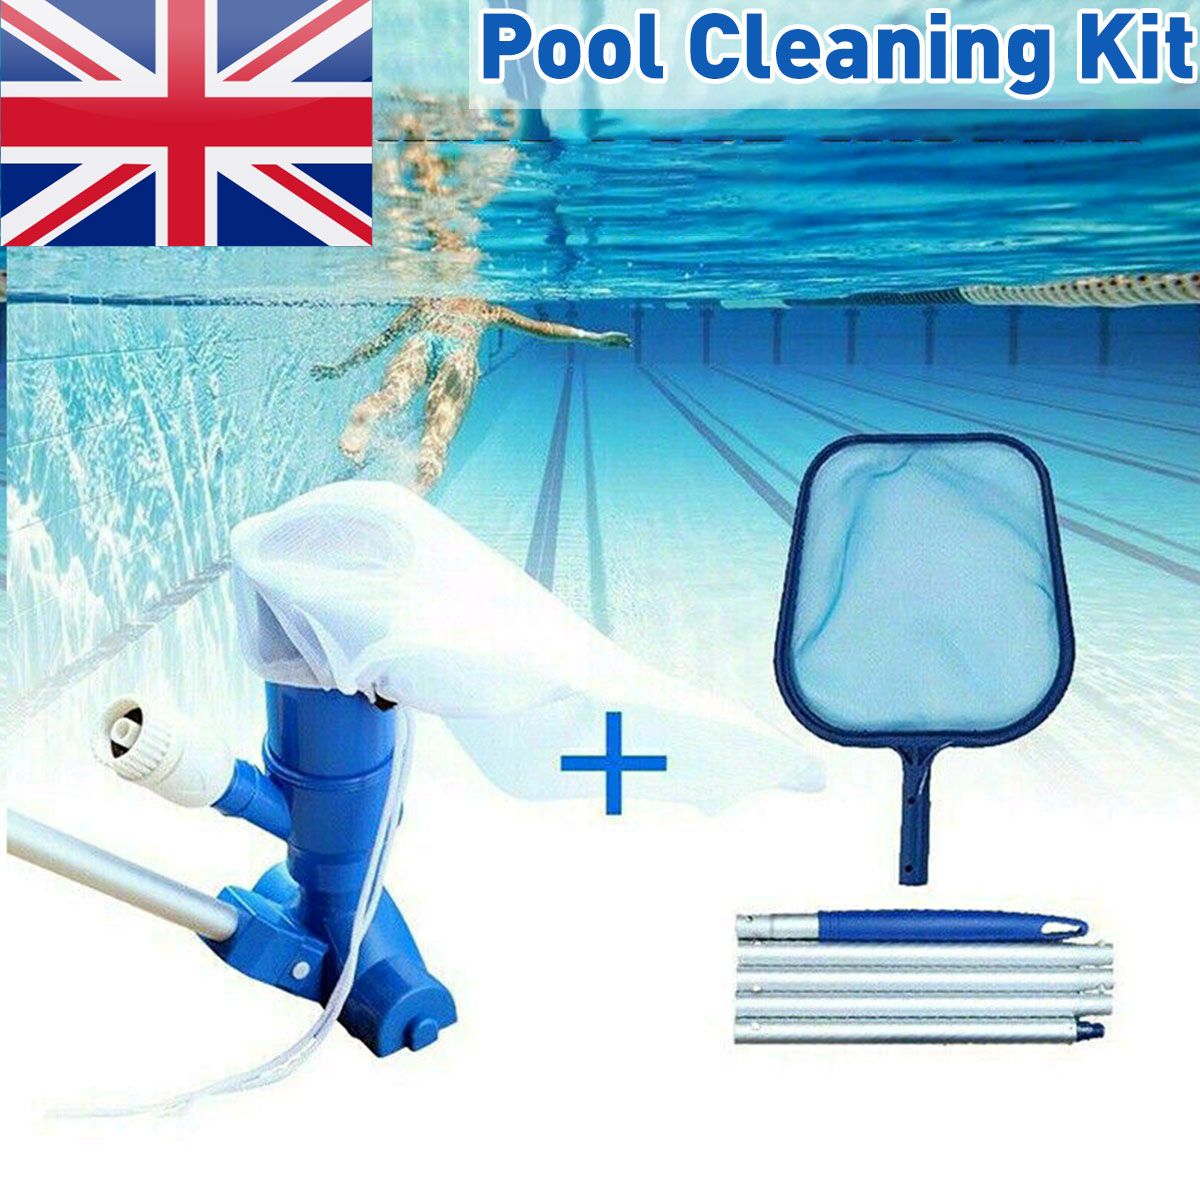 Pool-Water-Cleaning-Kit-Swimming-Vacuum-Cleaner-Leaf-Skimmer-Tool-Set-Removable-Tools-1723776